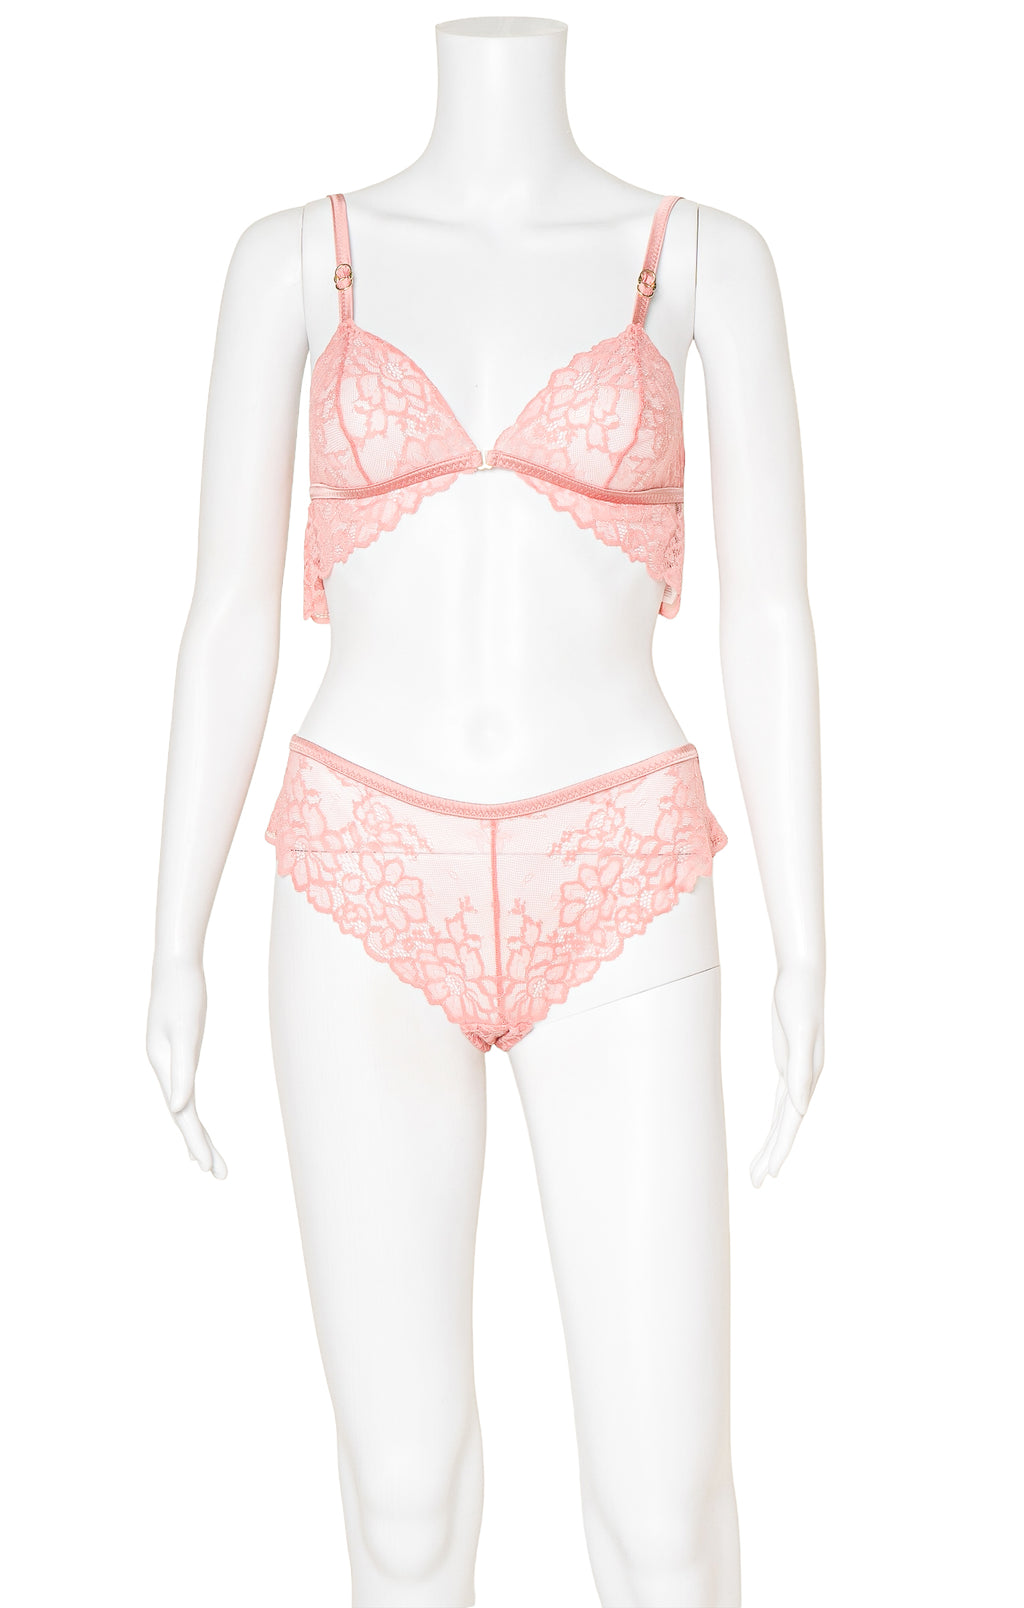 STELLA MCCARTNEY (NEW) with tags Lingerie Set Size: S